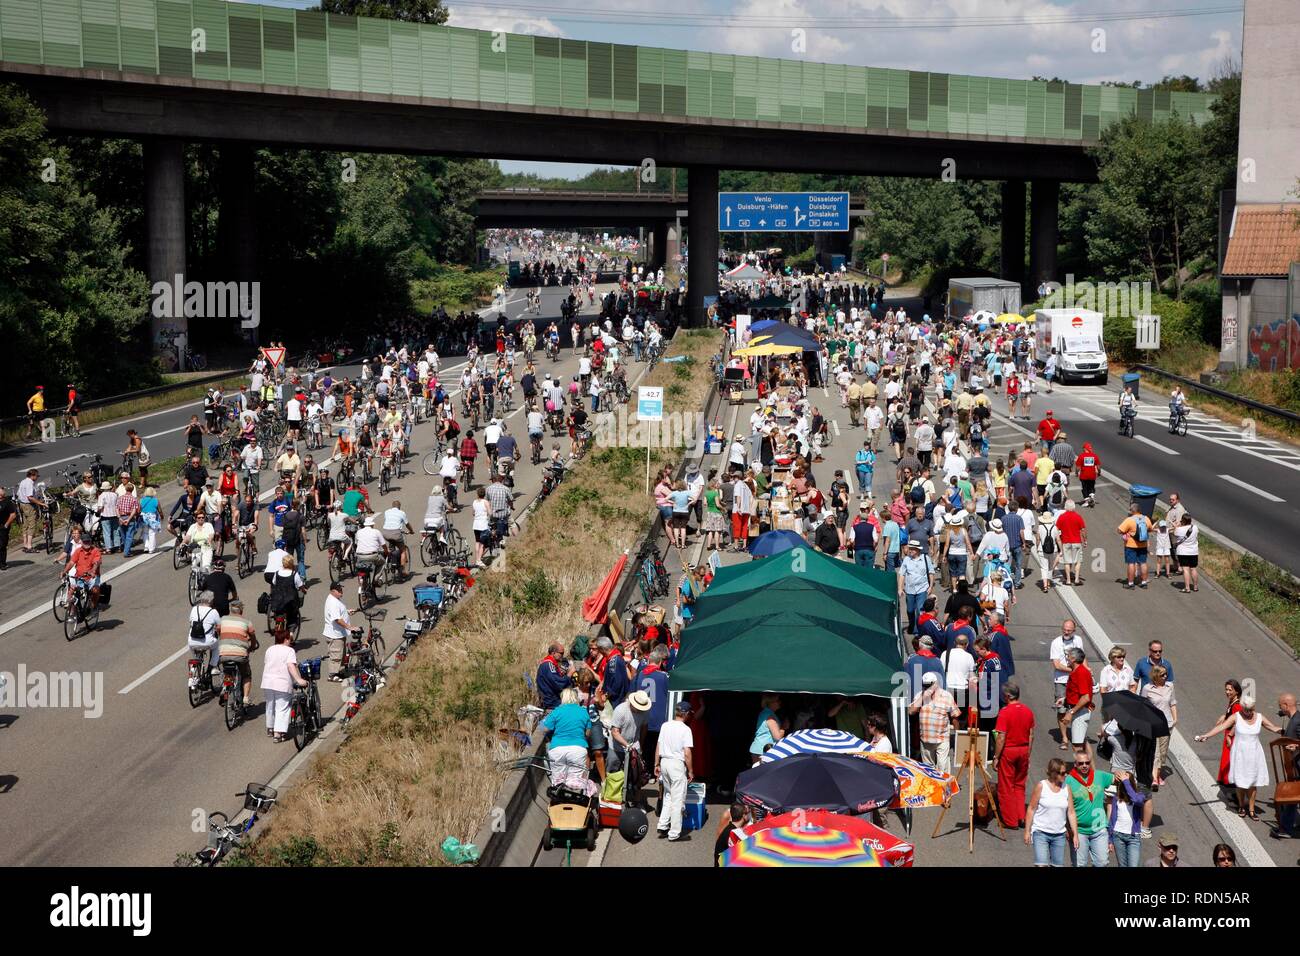 The Duisburg-Kaiserberg junction at the Still-Leben art event on the Ruhrschnellweg A40 motorway, largest event of the Capital Stock Photo